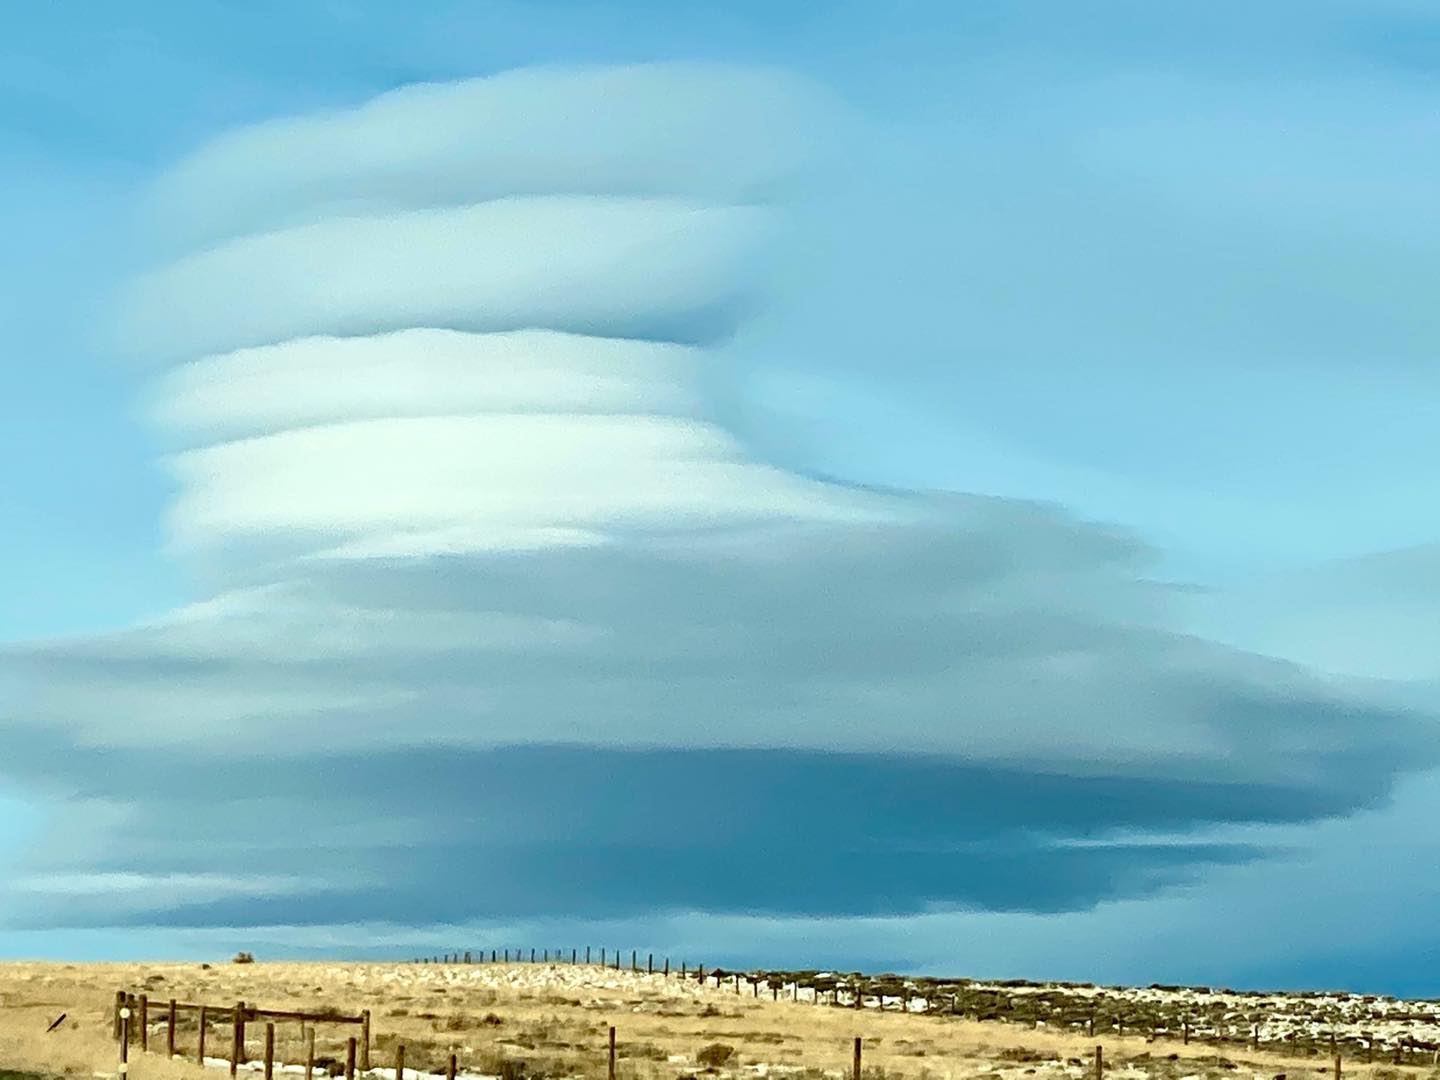 On our Sprinter trip from Maine to Idaho, this unusual cloud hung over us for miles driving west from Laramie, WY. Heavy winds and snow squalls were a challenge, but the Sprinter handled the conditions well. #sprintervan #unusualcloudphotography #winnebagorevel #orcuttphotography #vanlife #wyominglandscape #wyomingsky